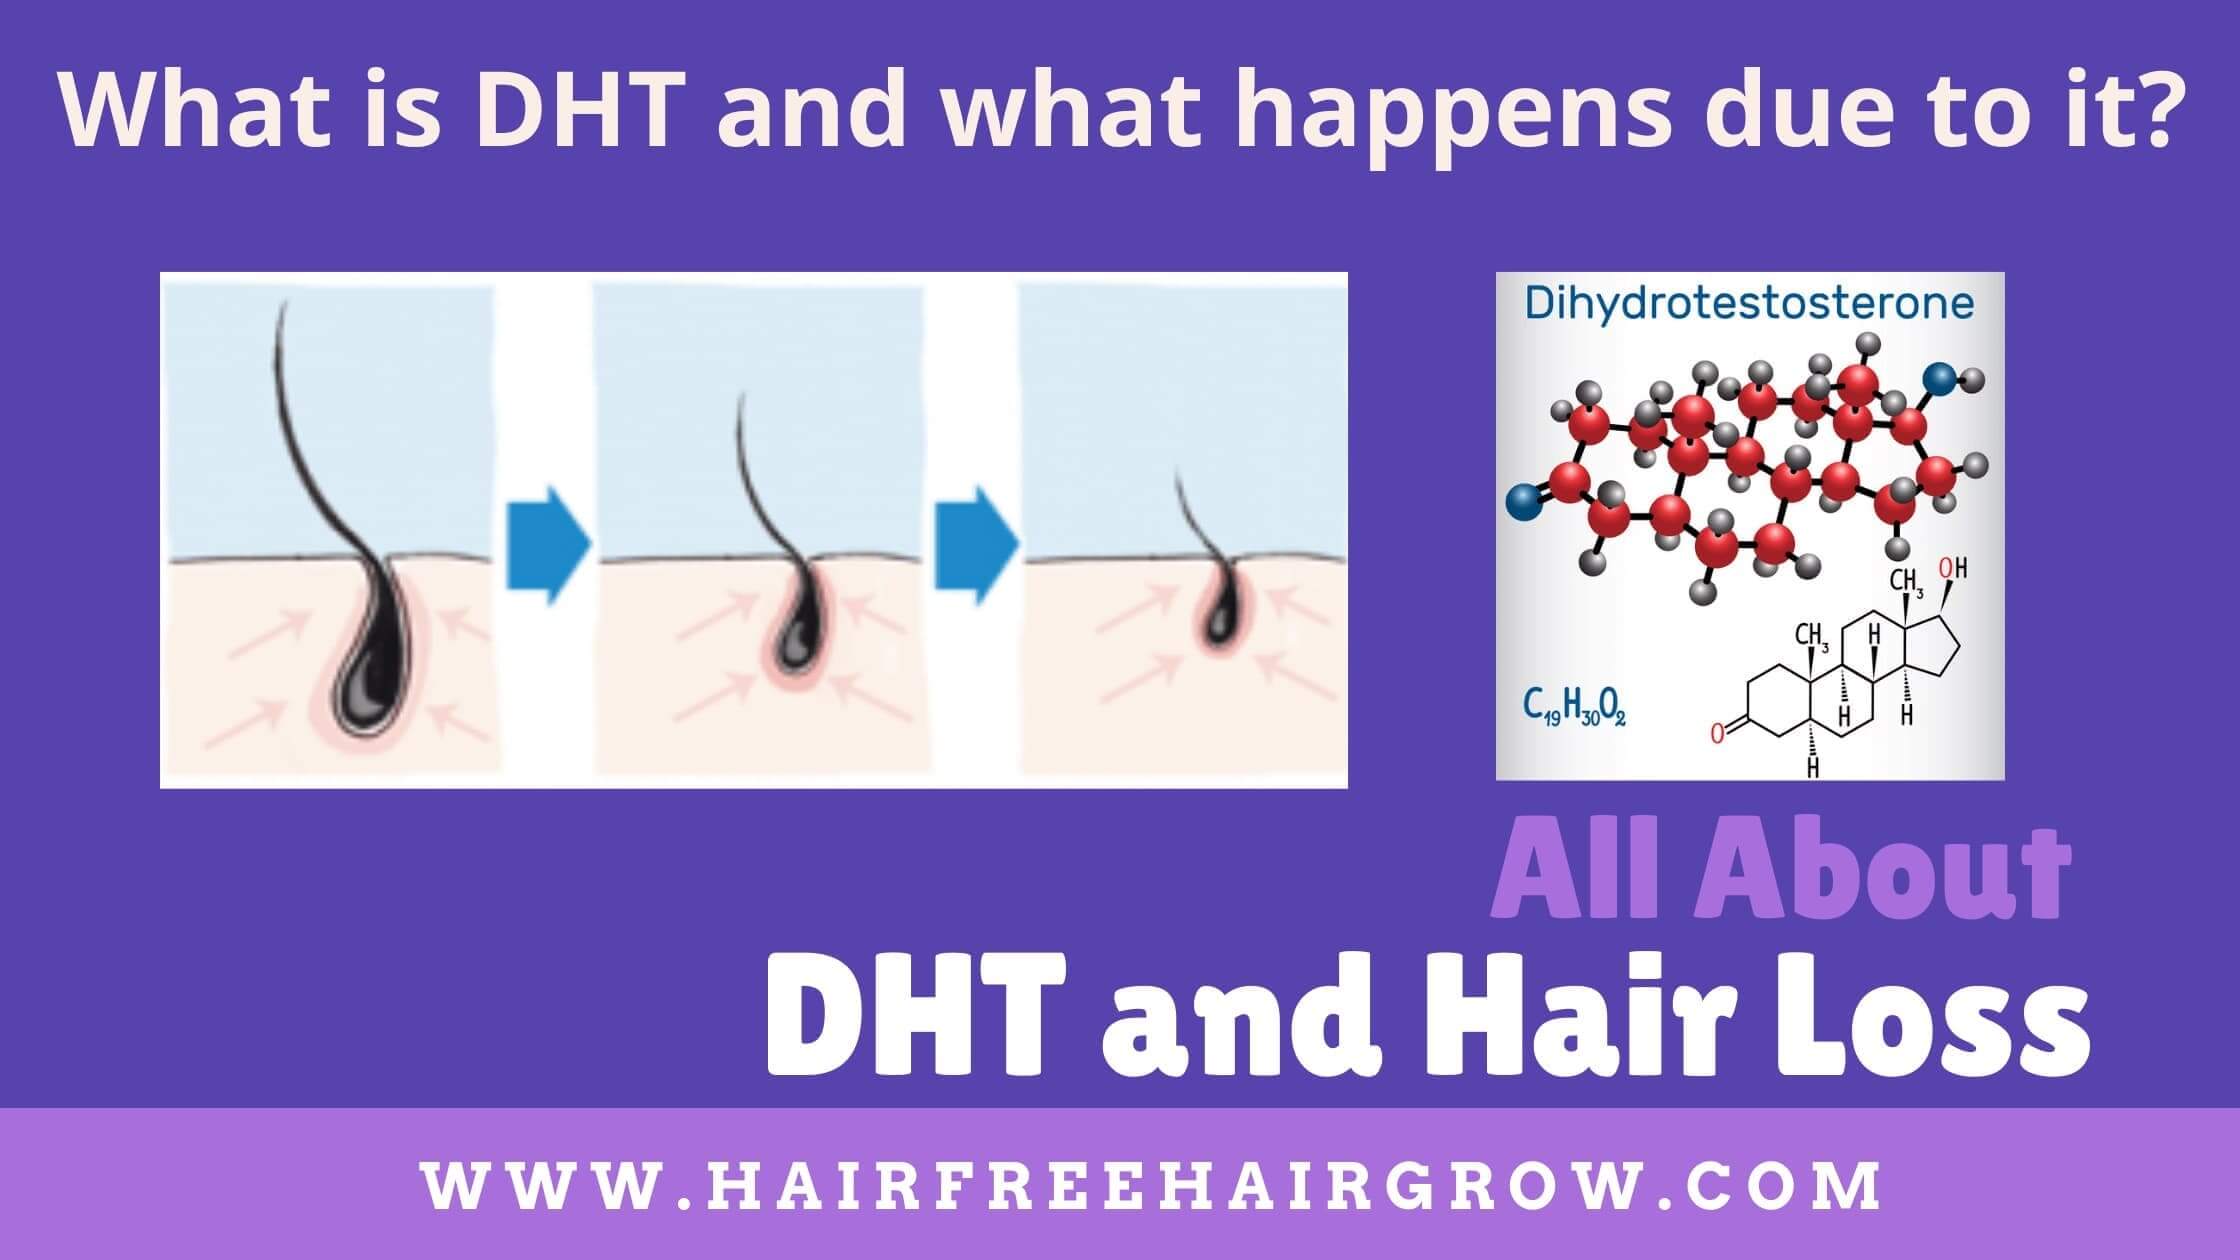 chemical structure of dihydrotestosterone used for a dht treatment for hair loss